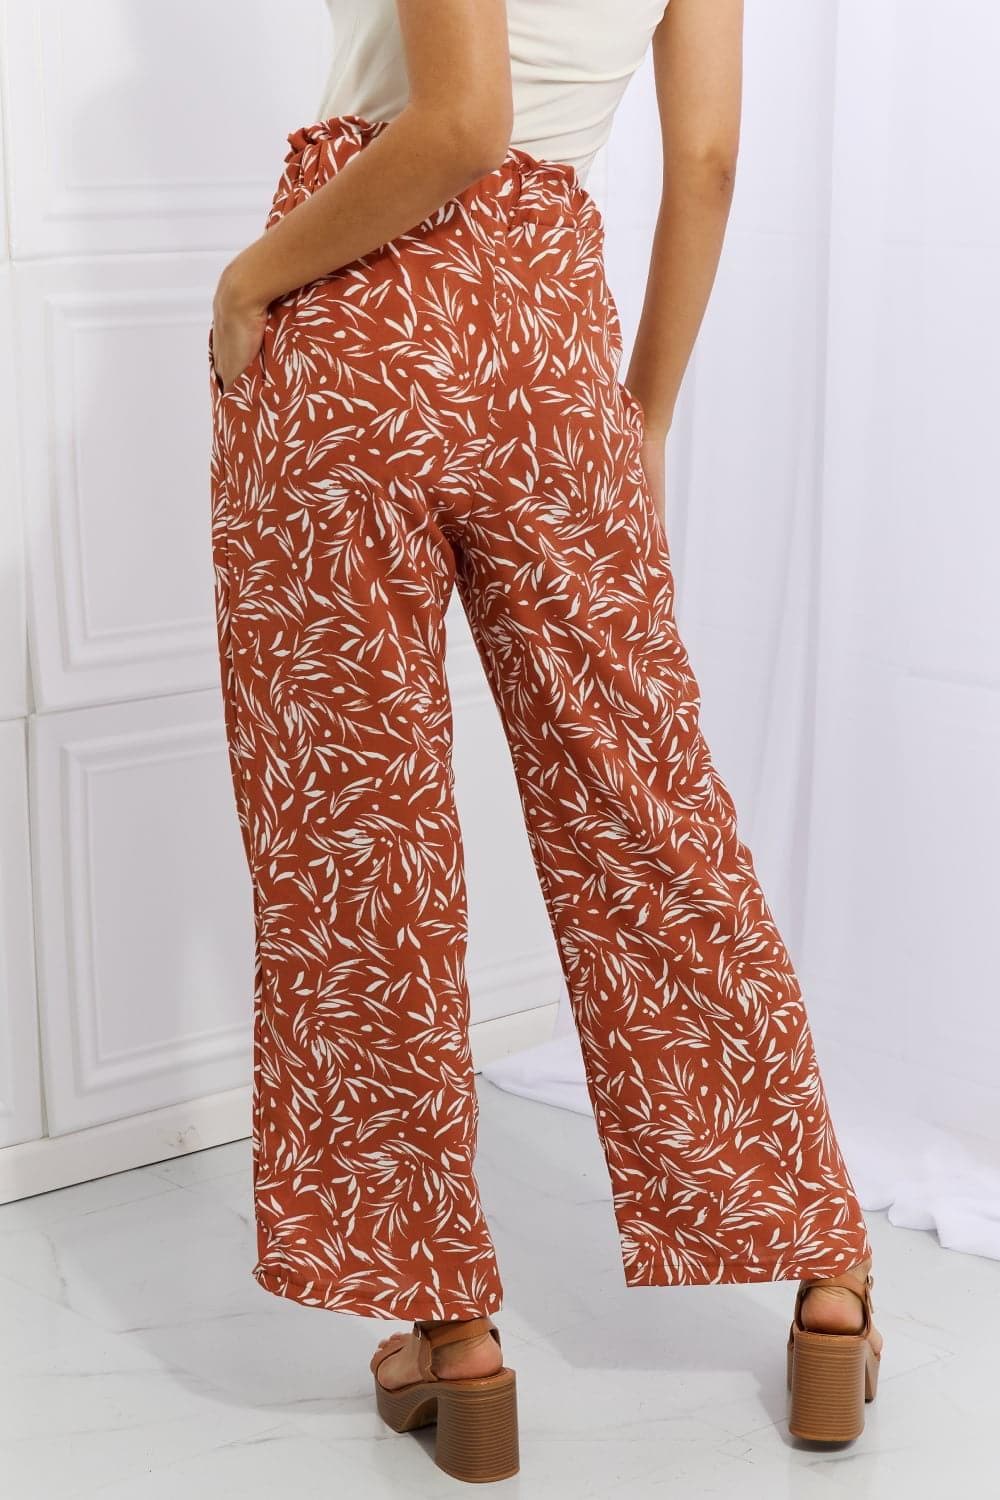 Heimish Right Angle Full Size Geometric Printed Pants in Red Orange - SwagglyLife Home & Fashion